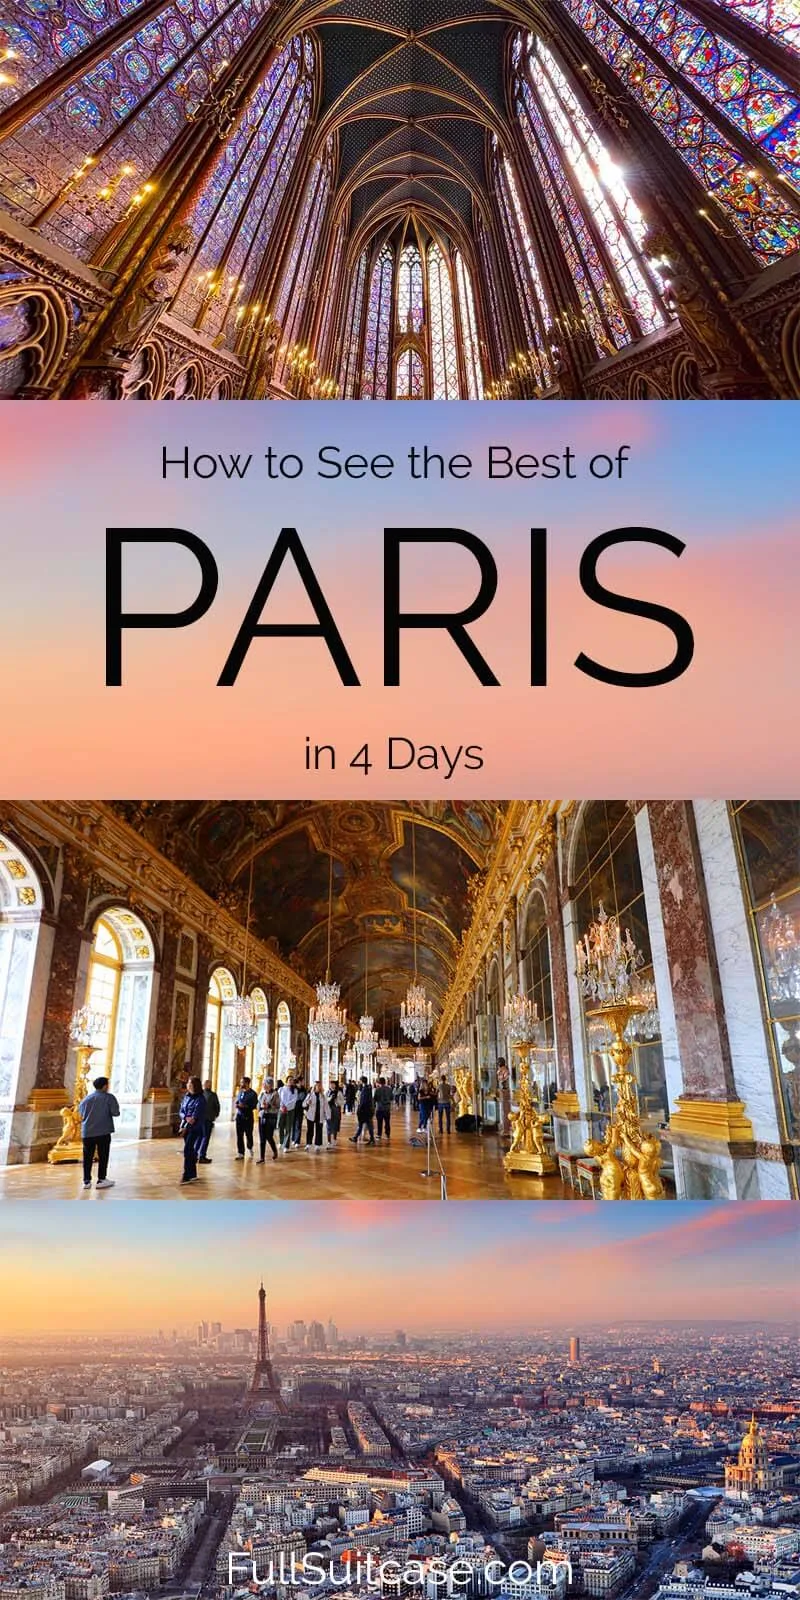 Paris in 4 days - what to see, detailed itinerary, and useful tips